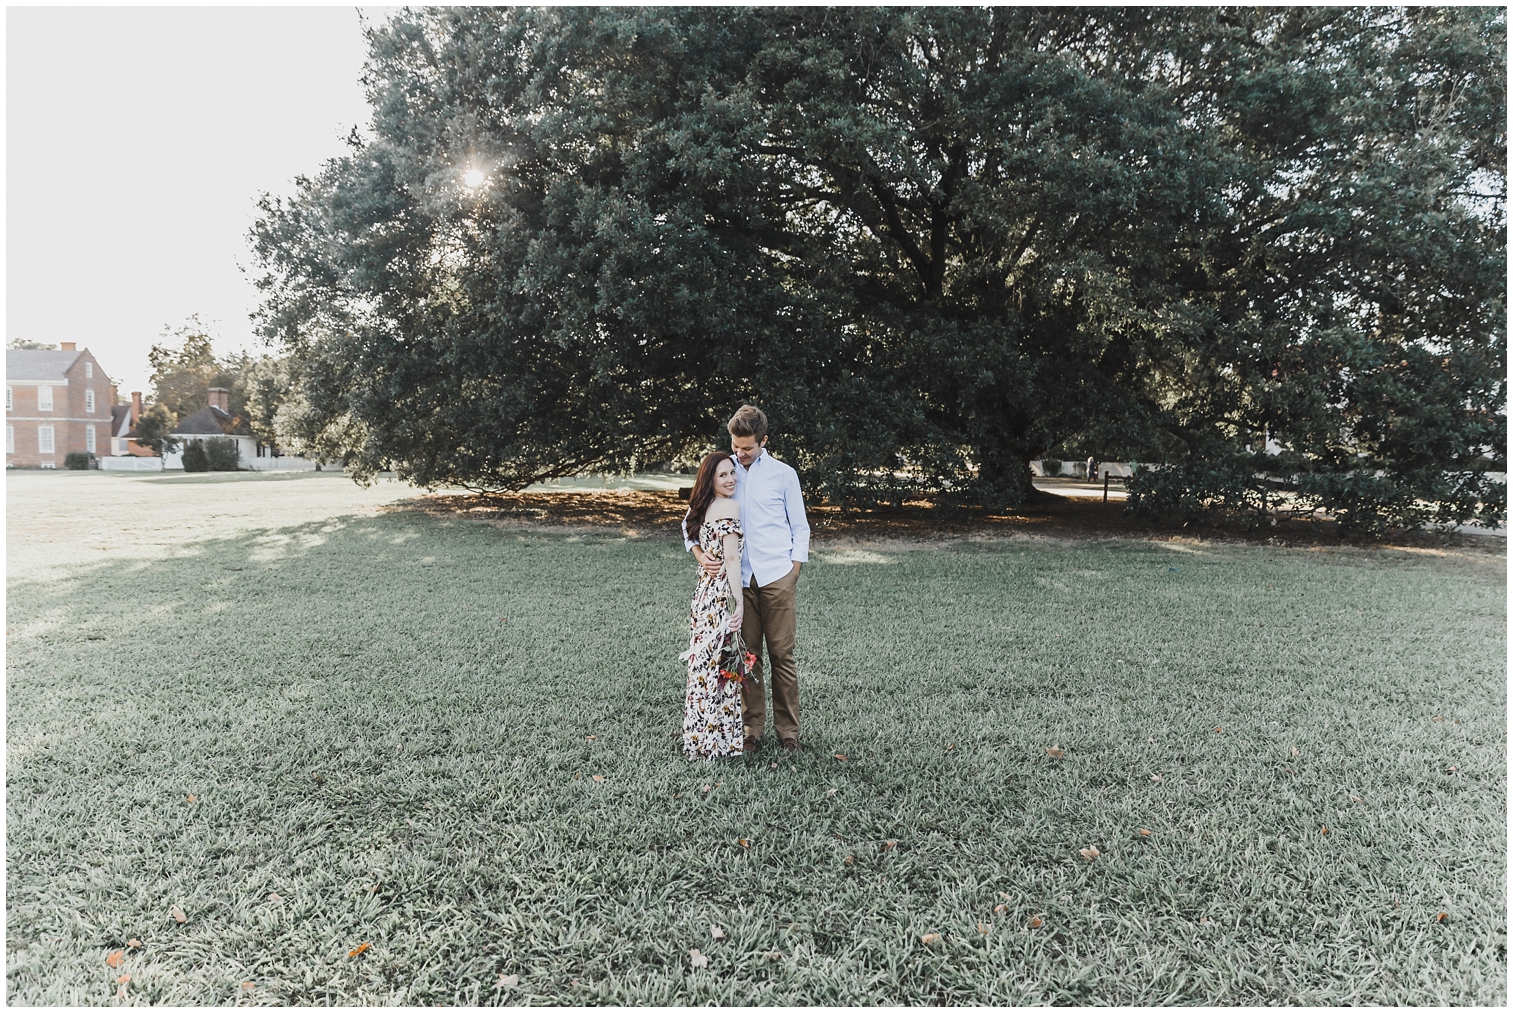 Curtis + Suzanne Colonial Williamsburg Engagement Session